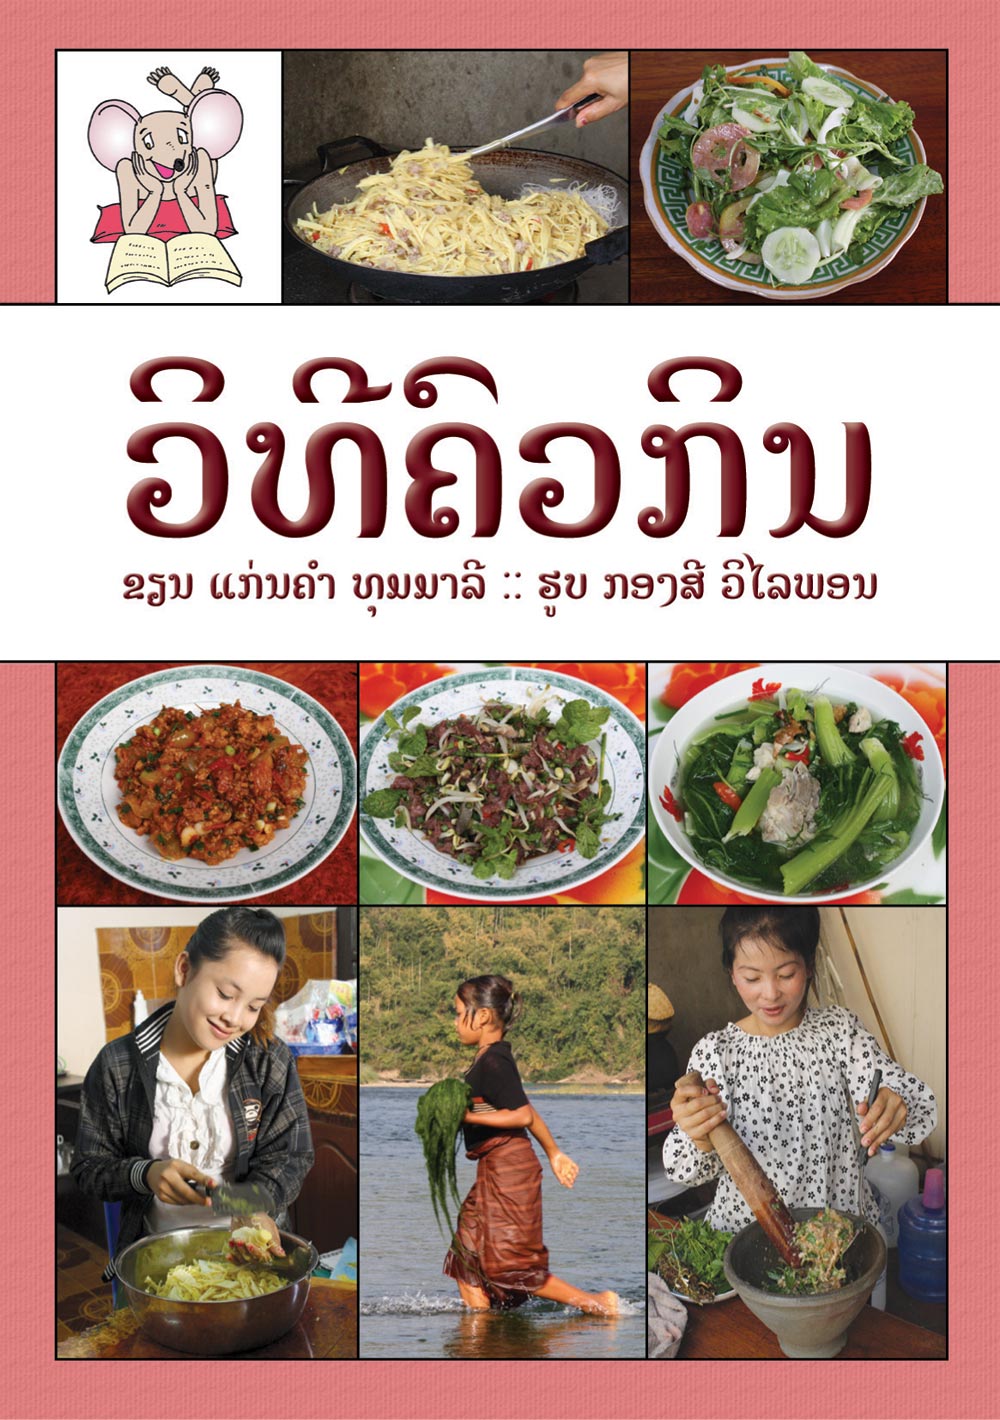 Cooking Lao Food large book cover, published in Lao language